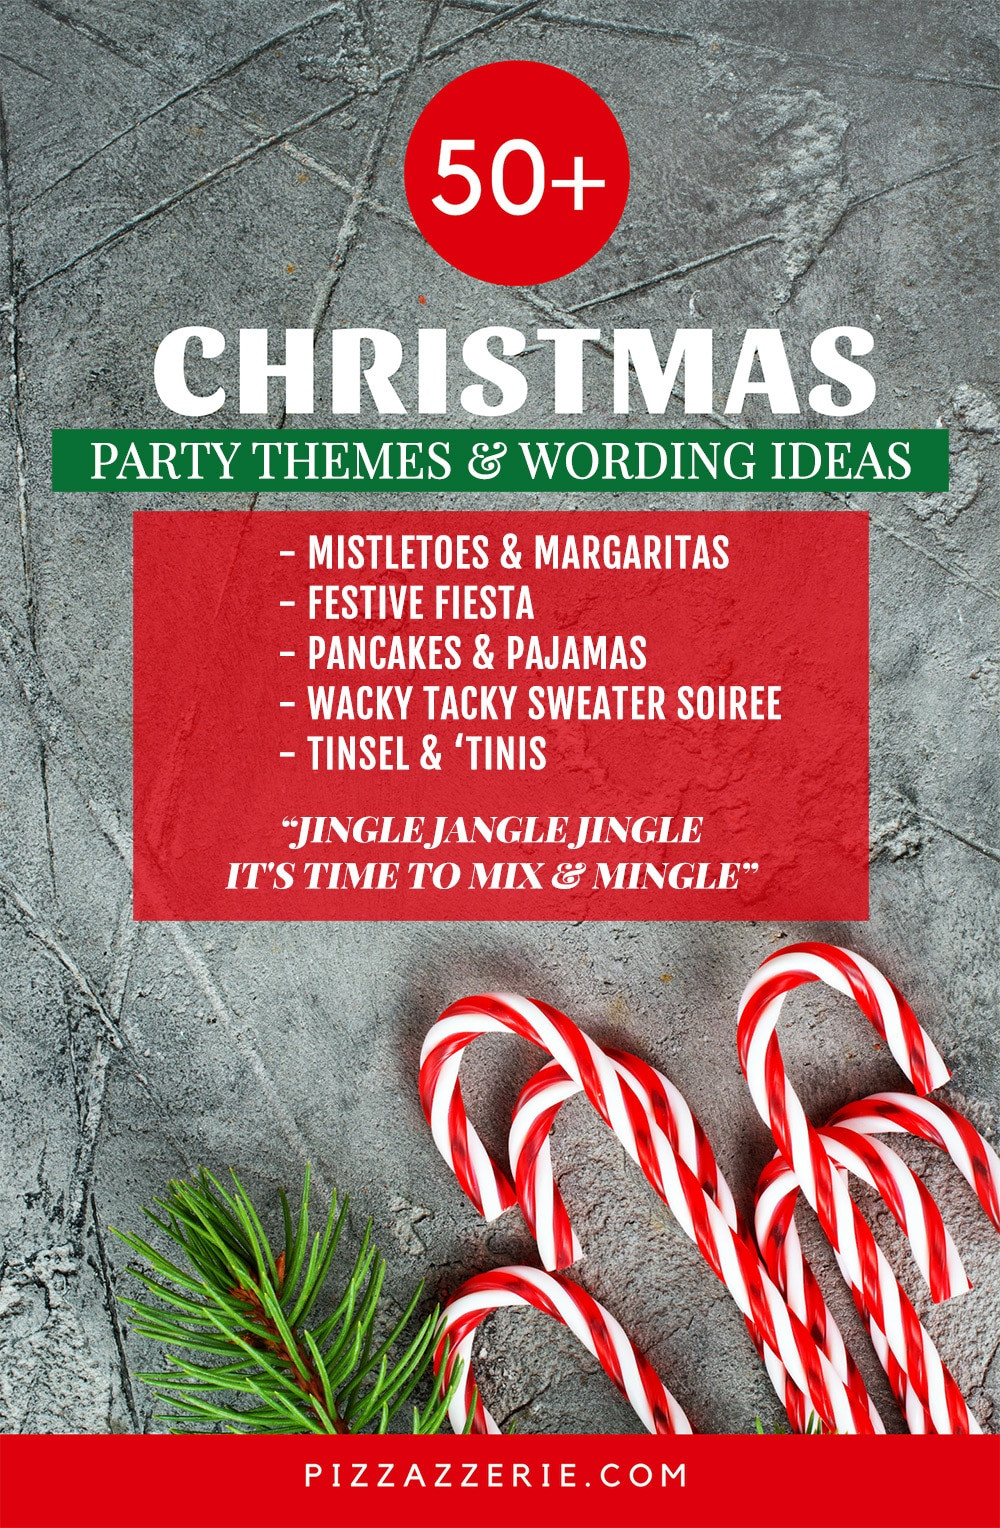 Holiday Party Name Ideas
 50 CHRISTMAS PARTY THEMES & CLEVER INVITATION WORDING